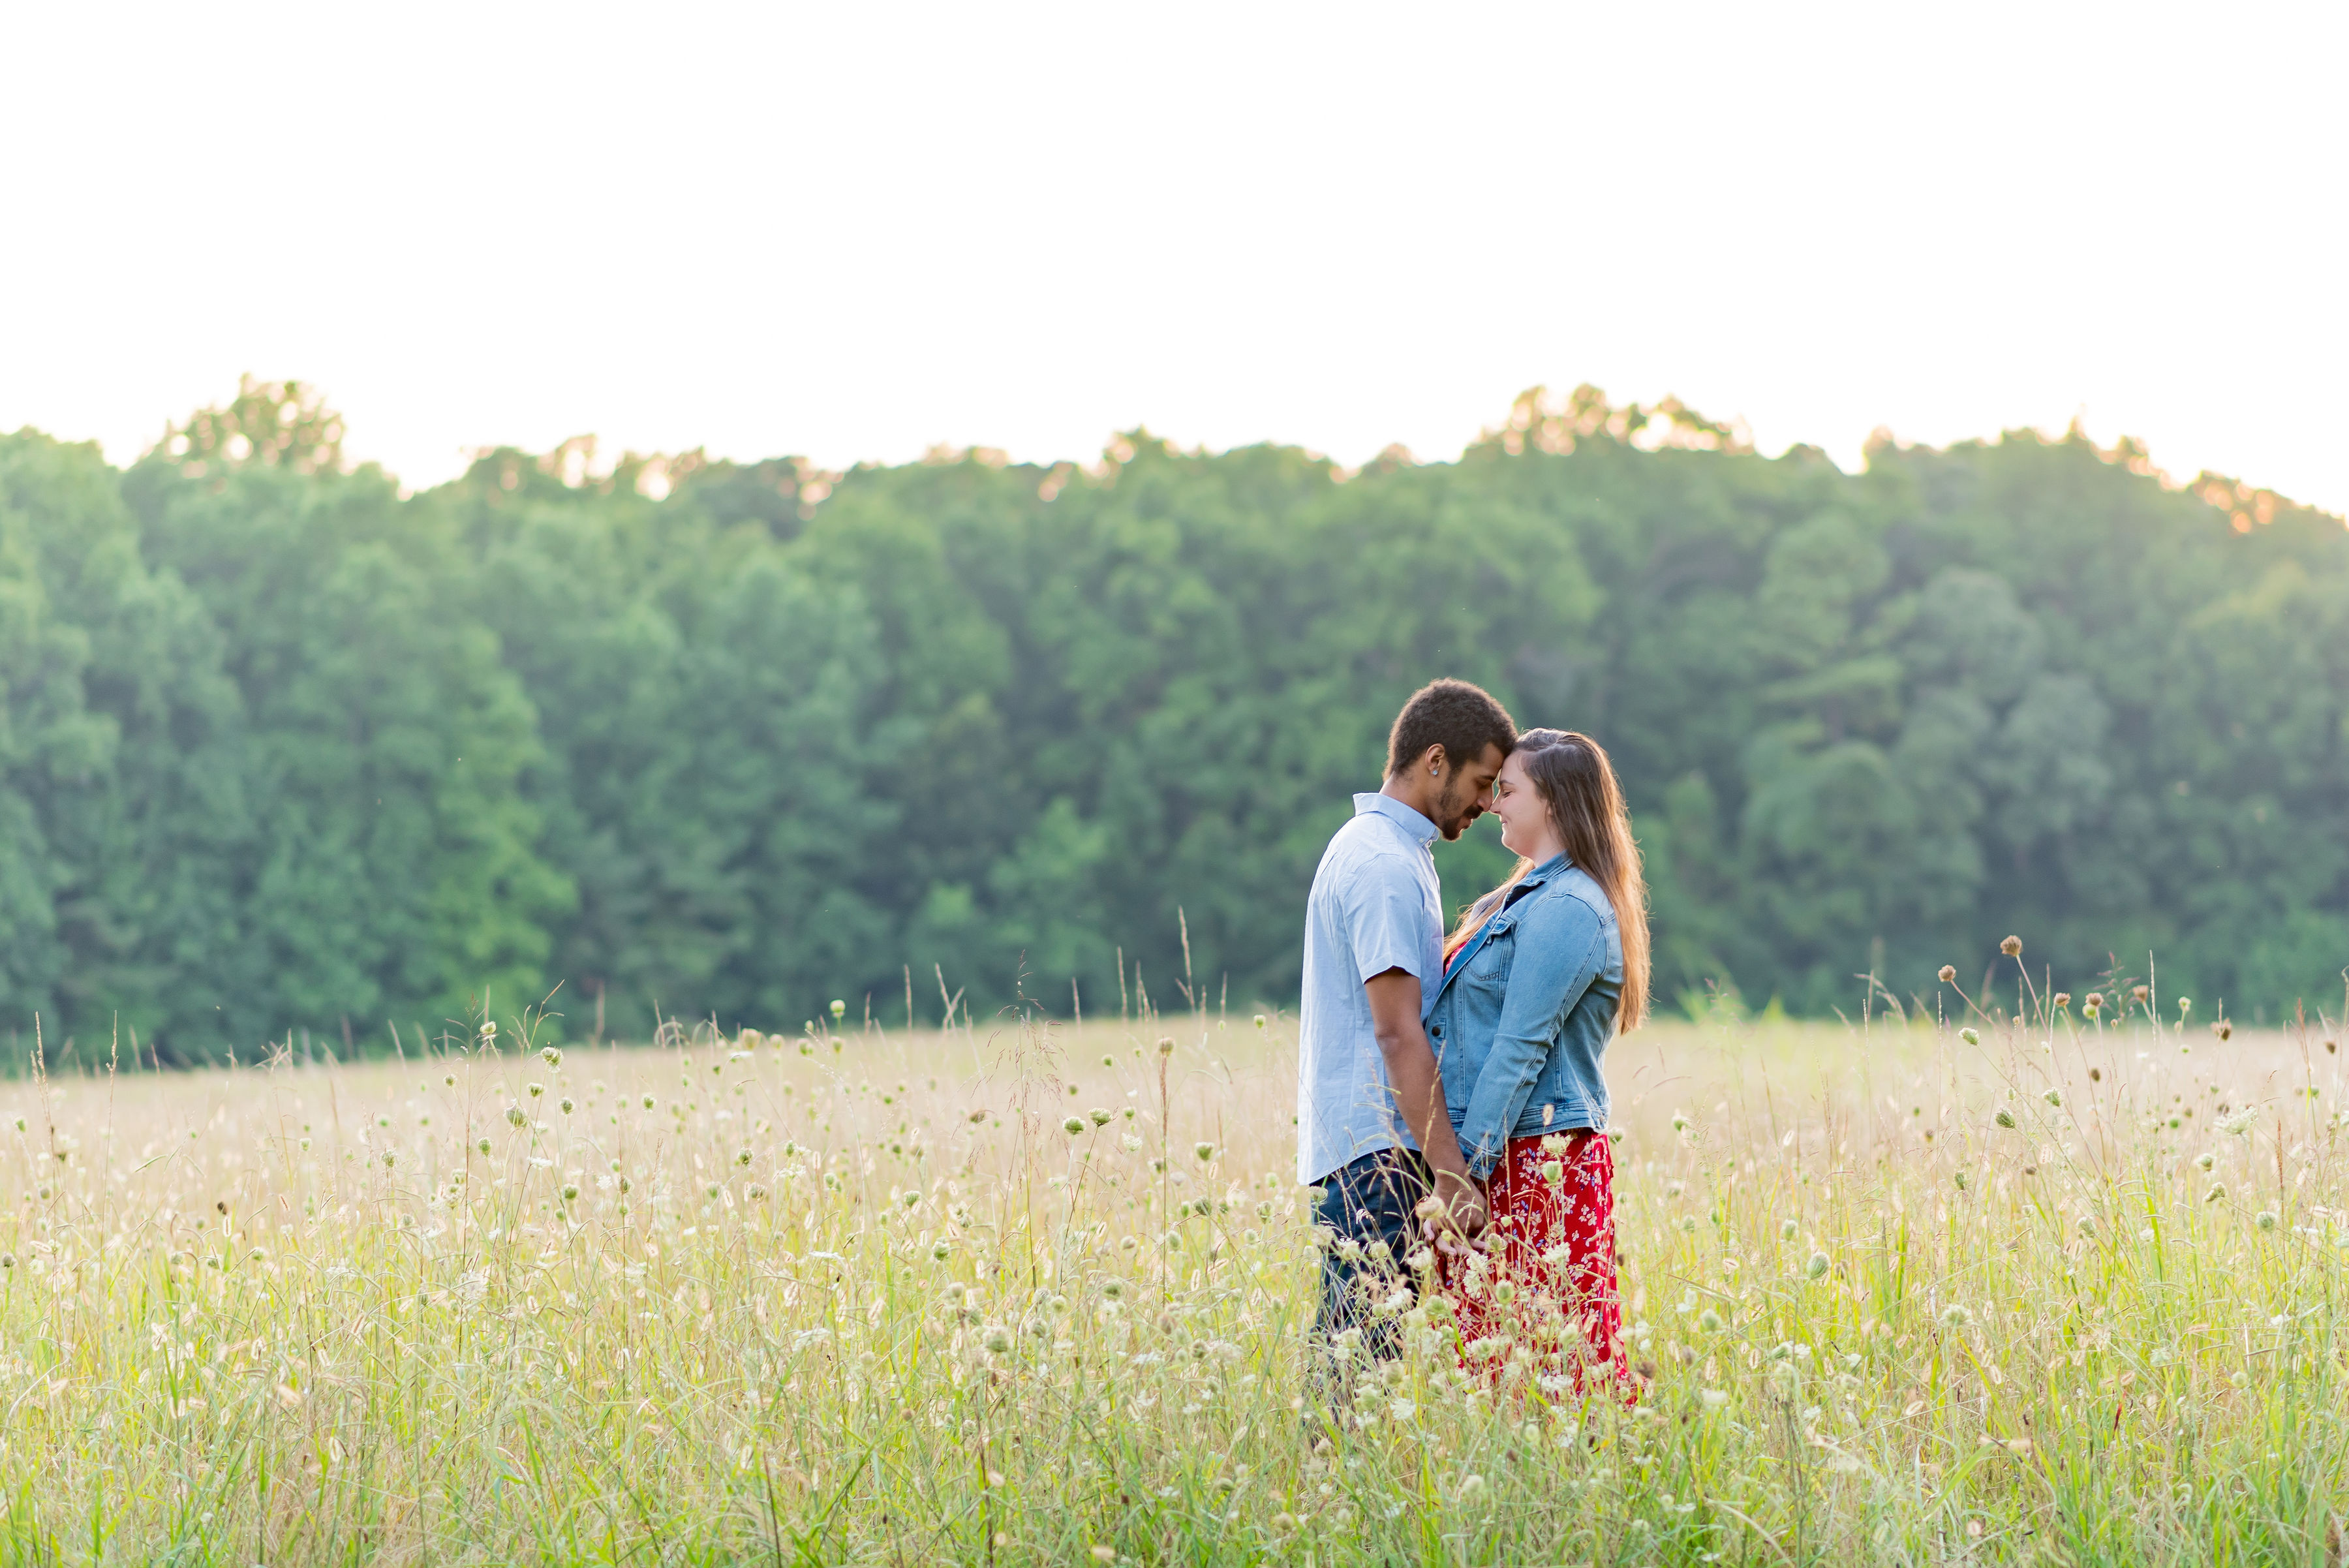 engaged couple in a grassy field